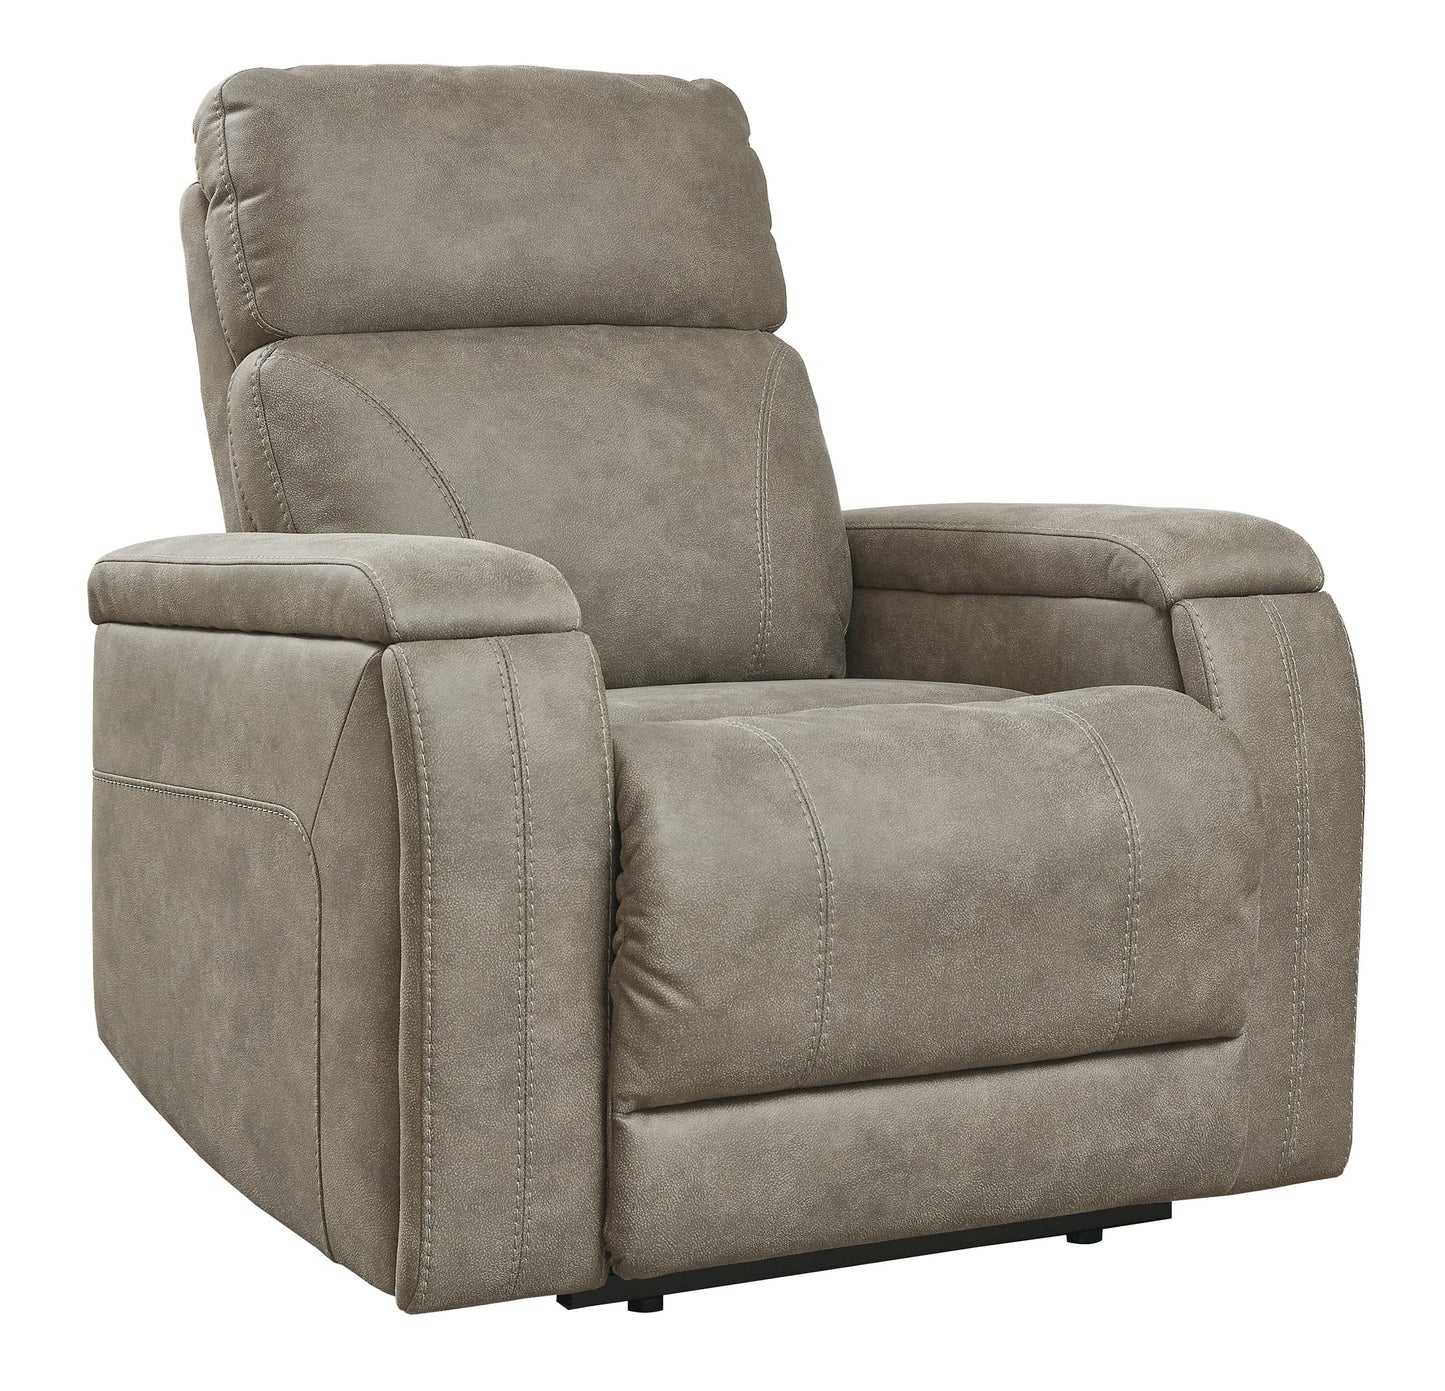 Rowlett Power Leather Look Recliner with adjustable headrest